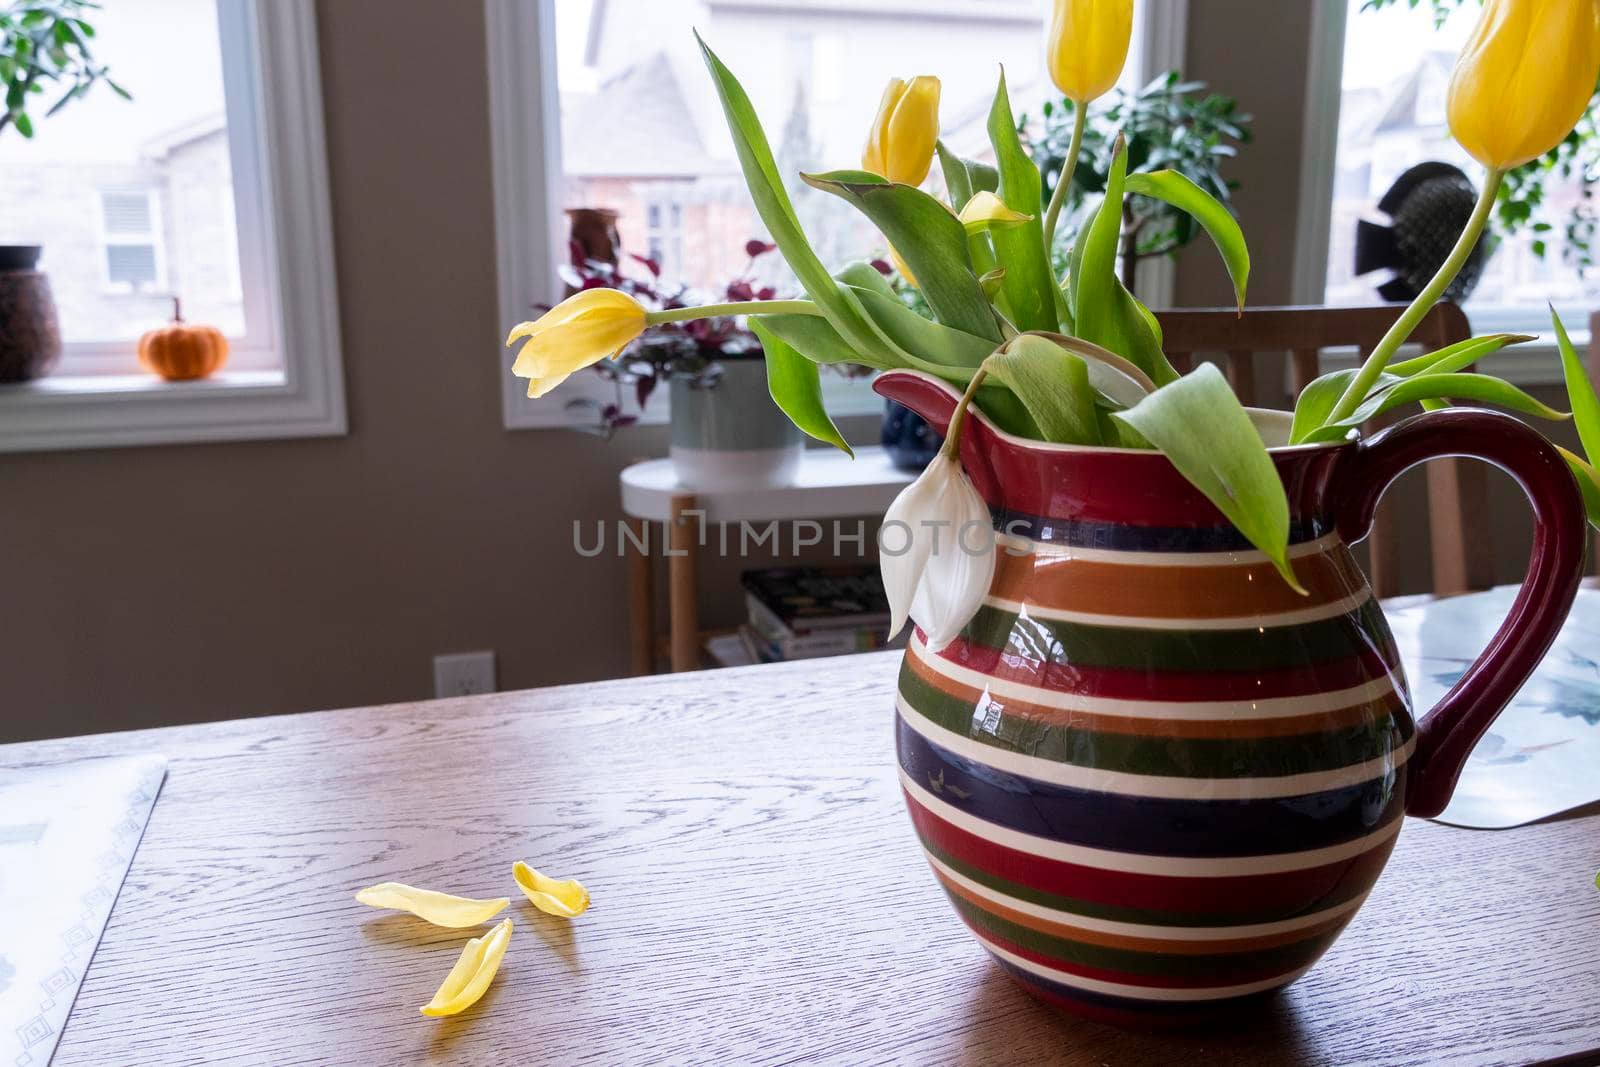 The yellow petals of the first spring tulips fall on the dining table